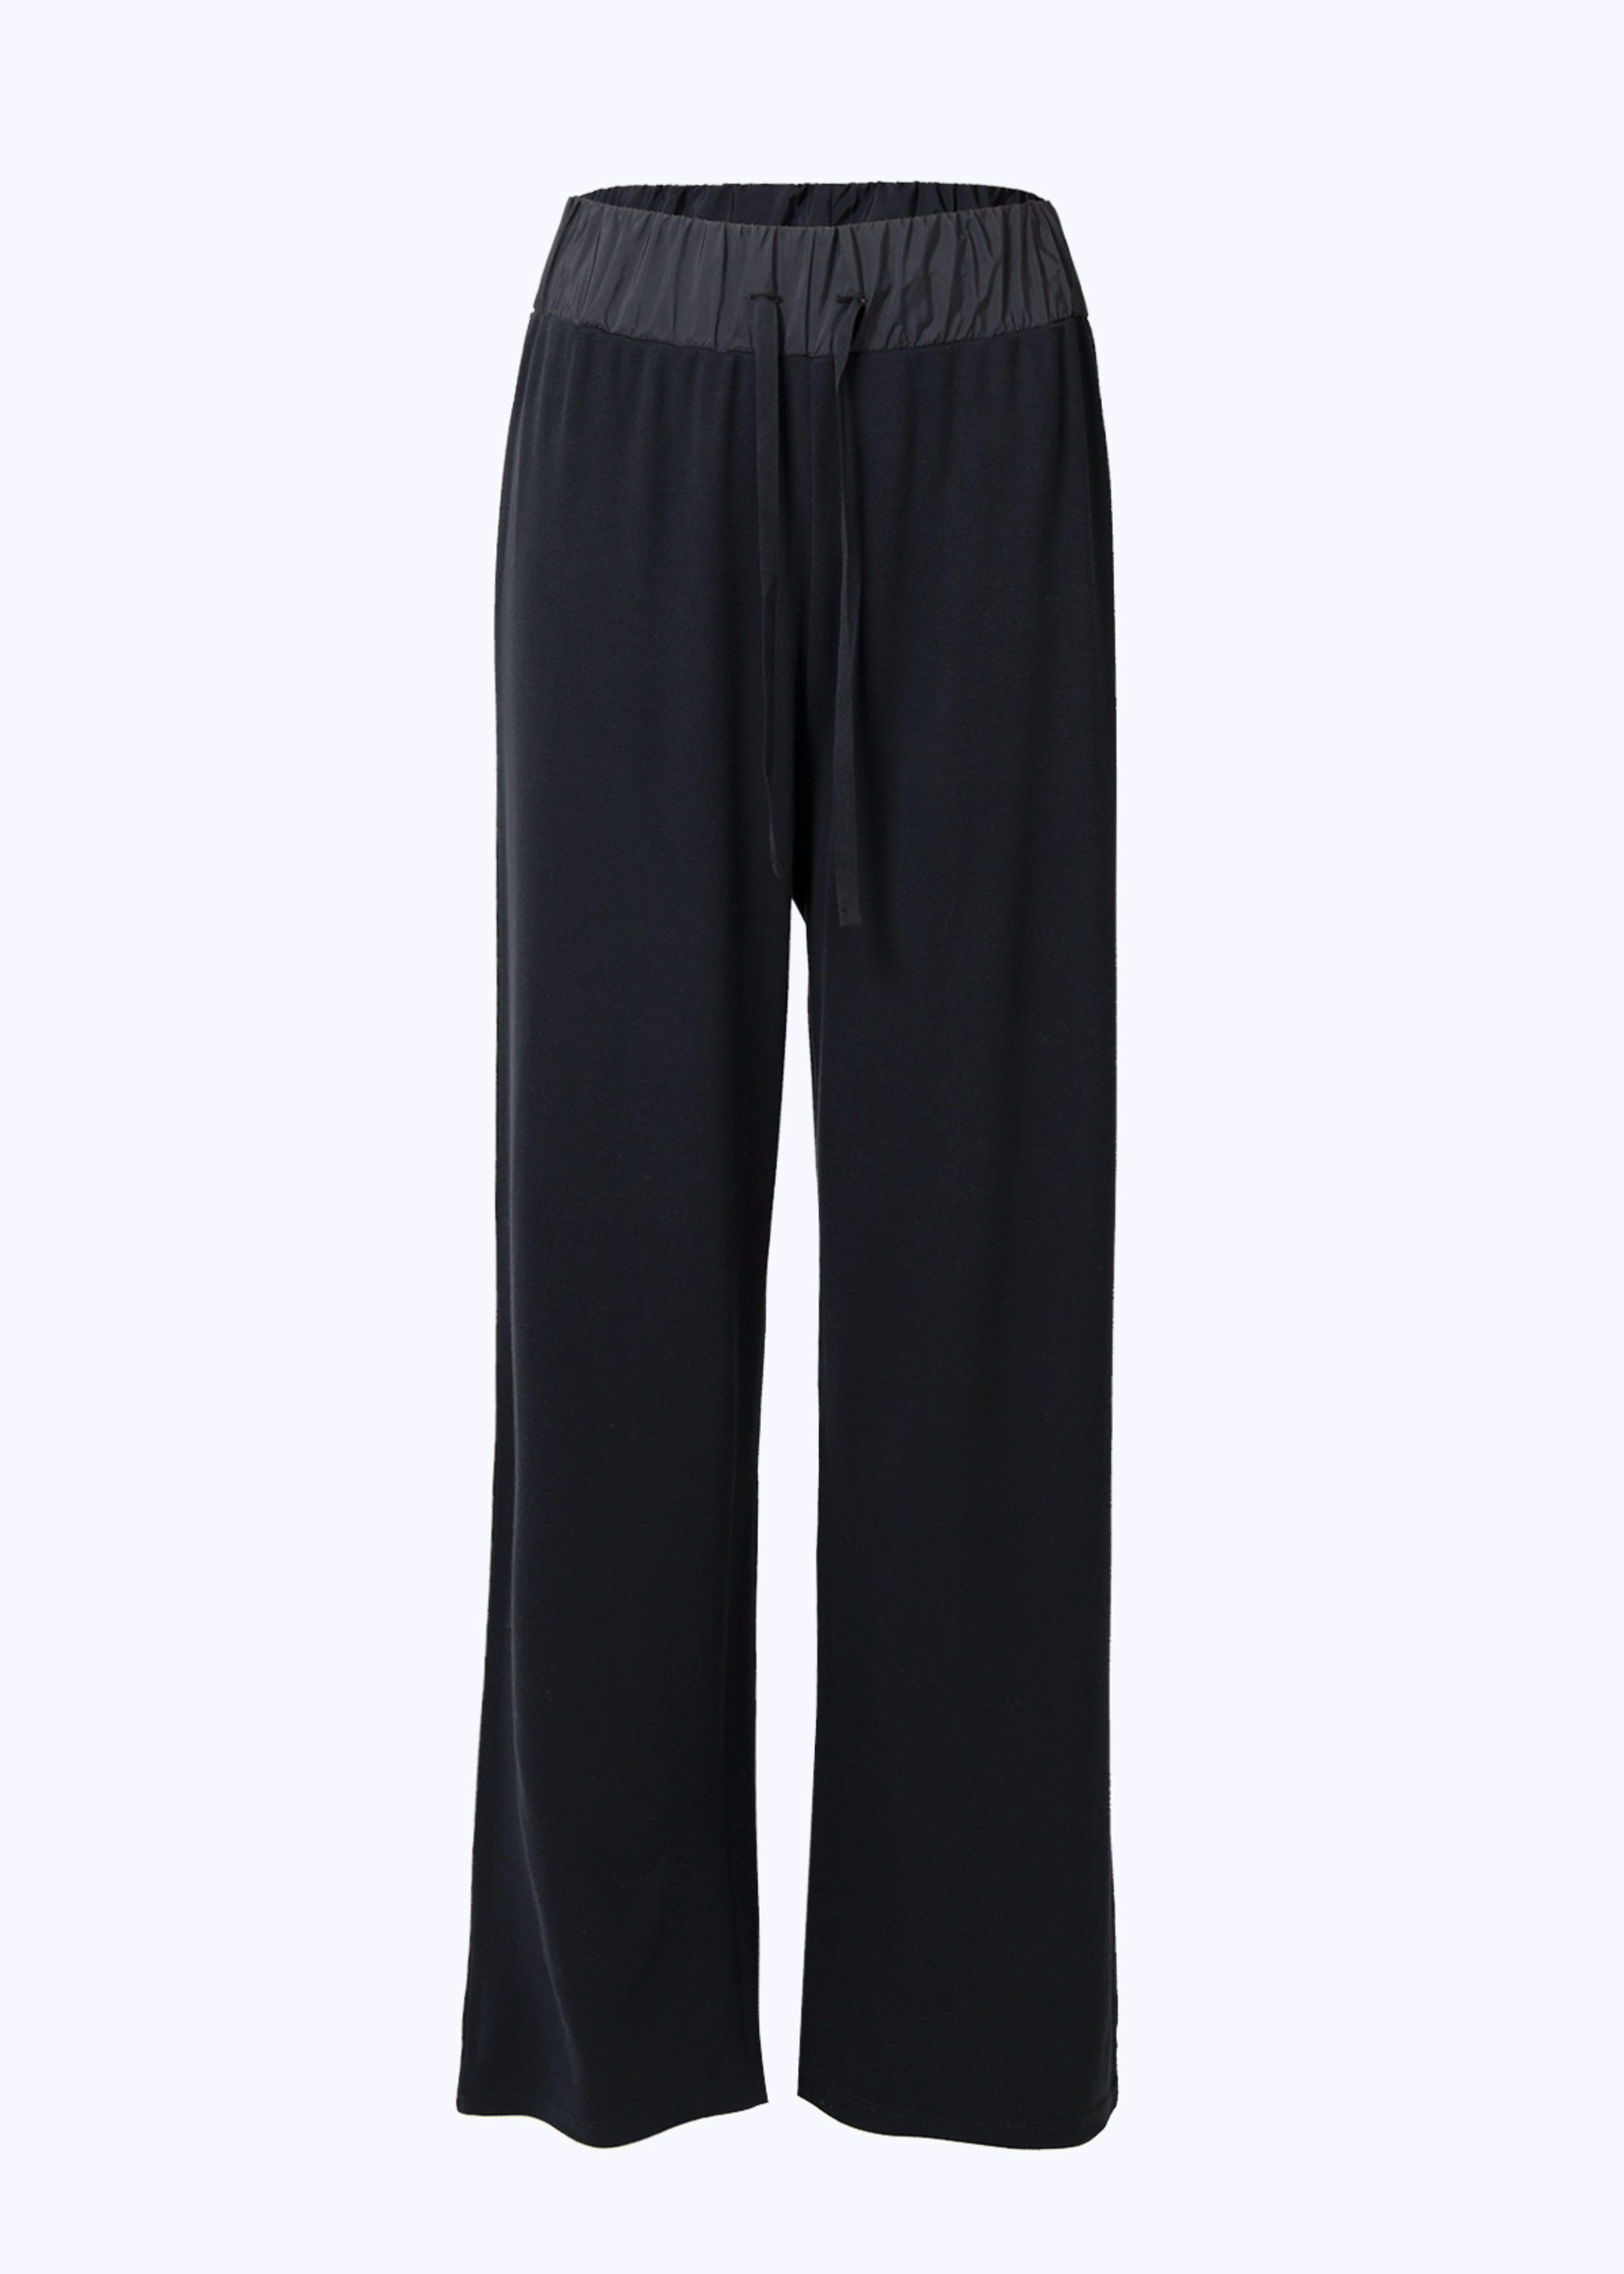 VDR RELAXED SWEATPANTS 9371